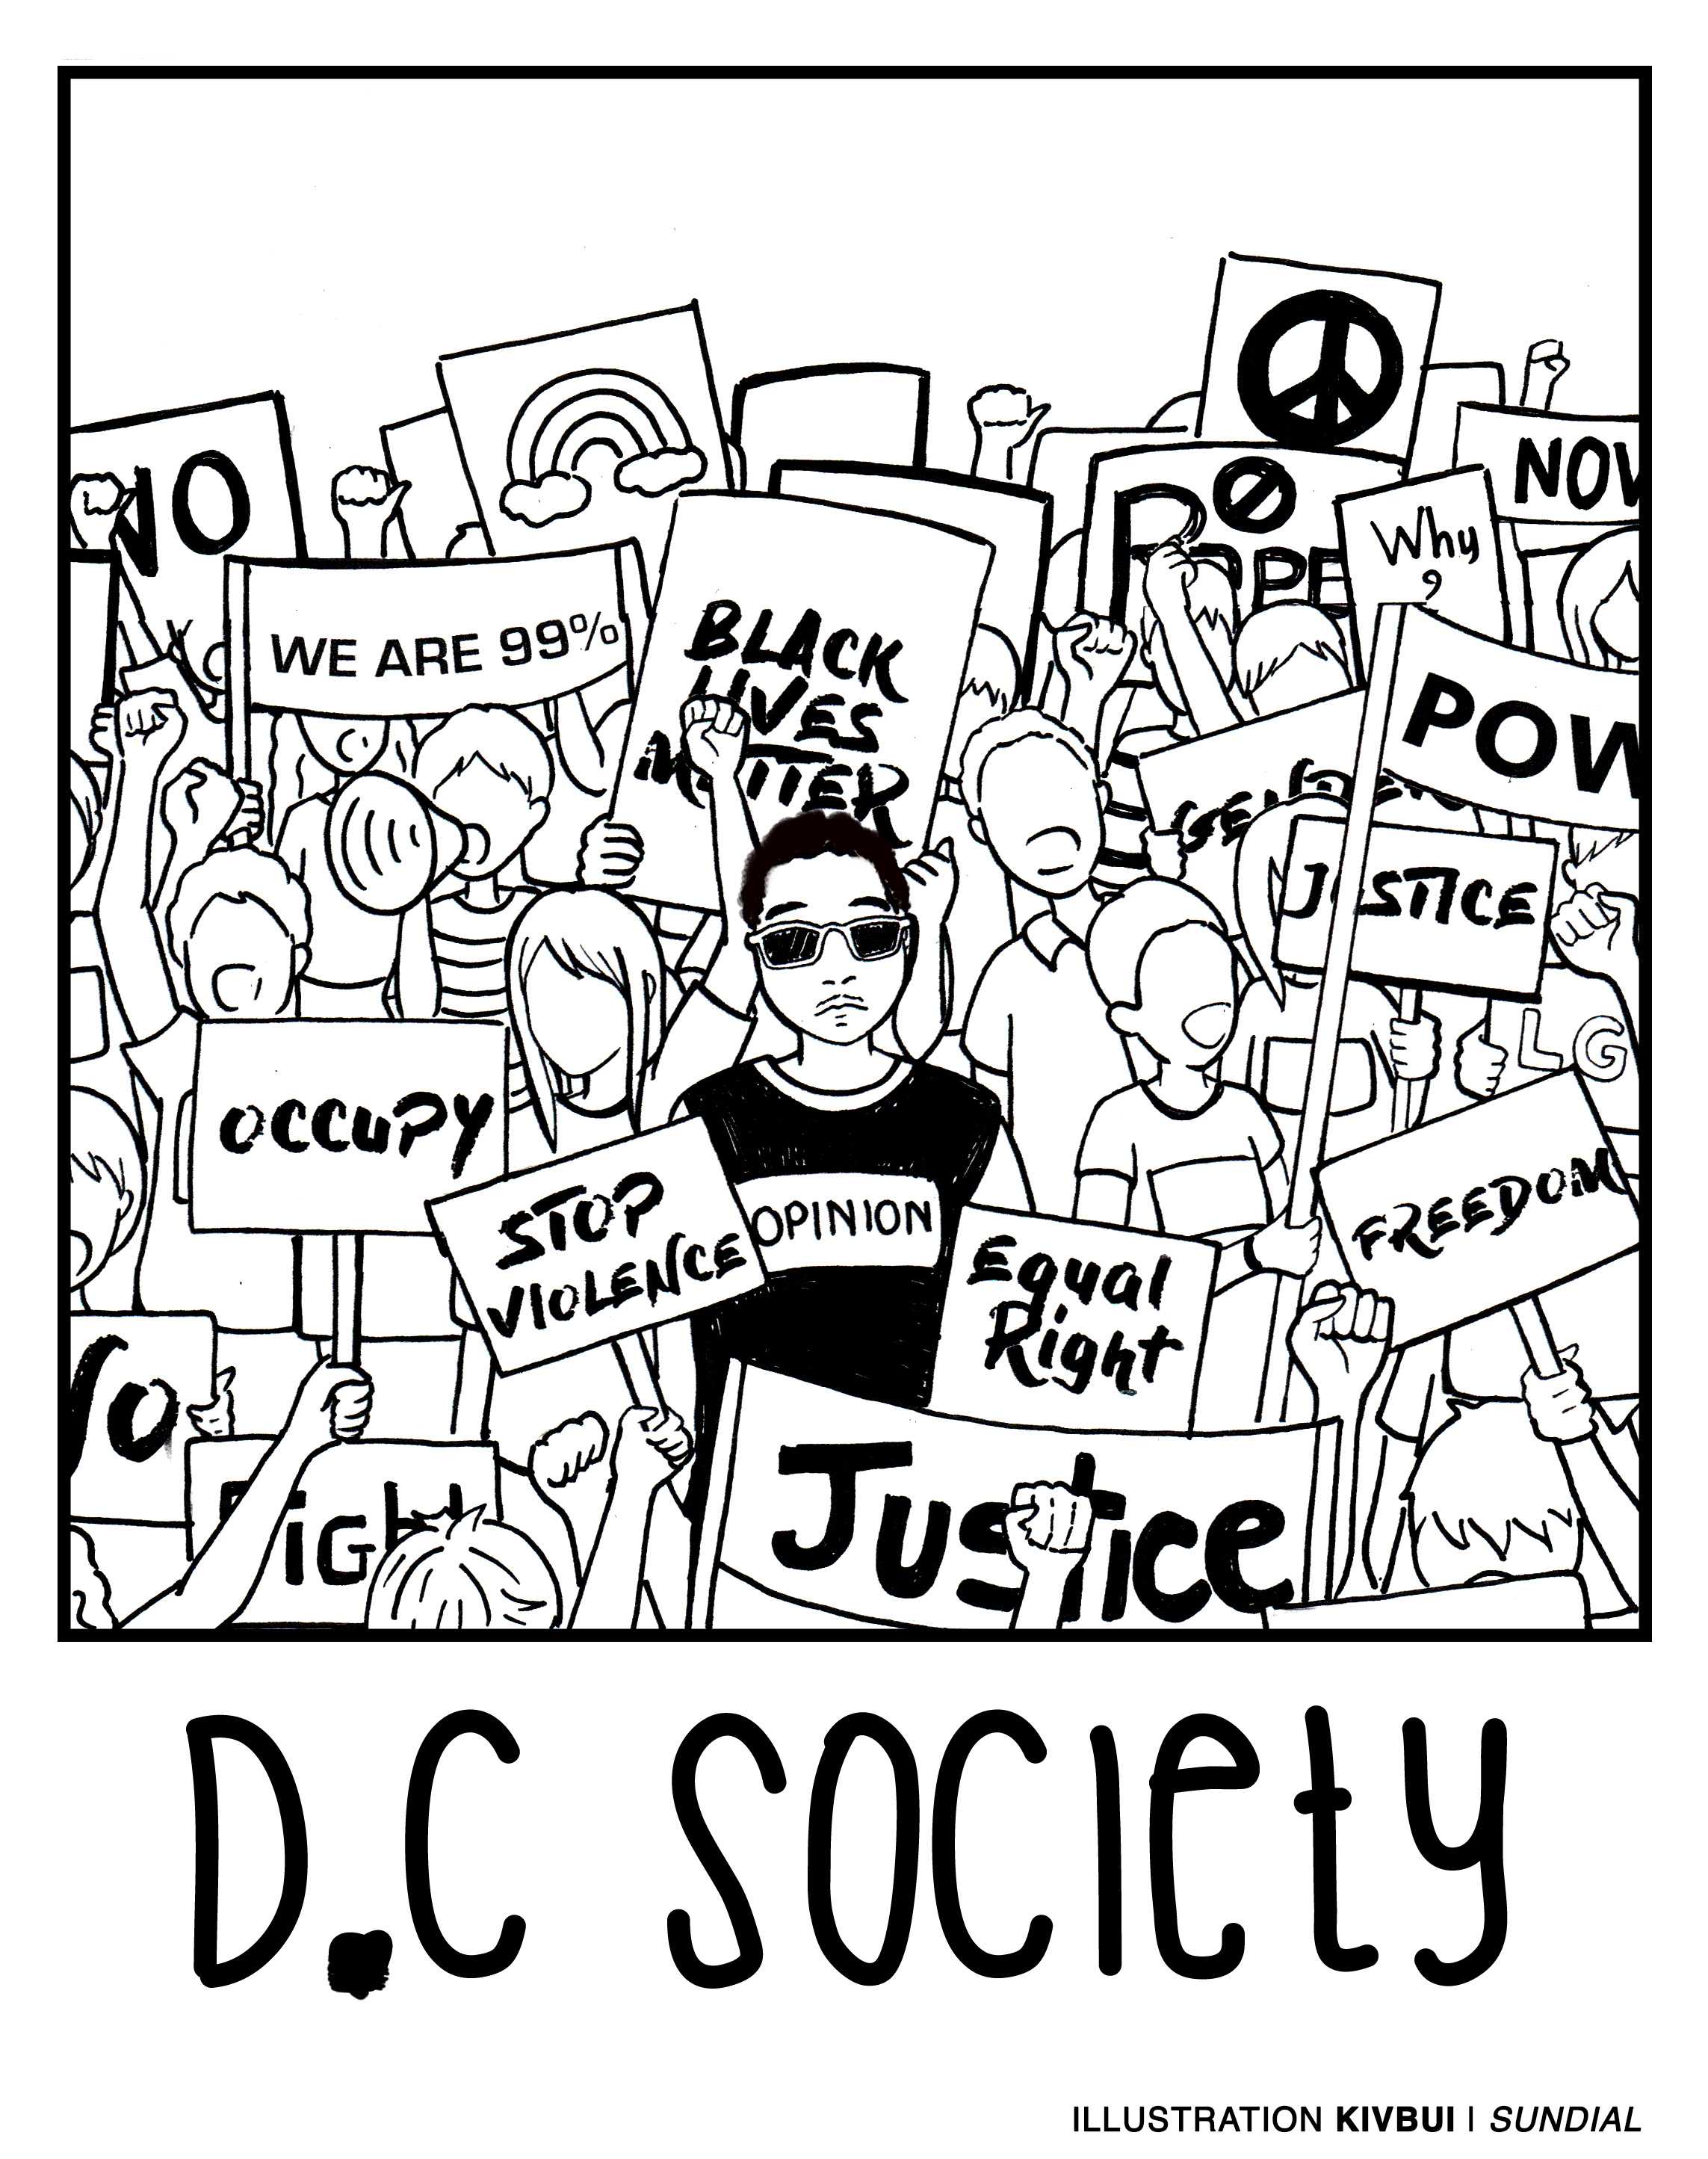 illustration+of+protesters+with+the+text%2C+D.C+society